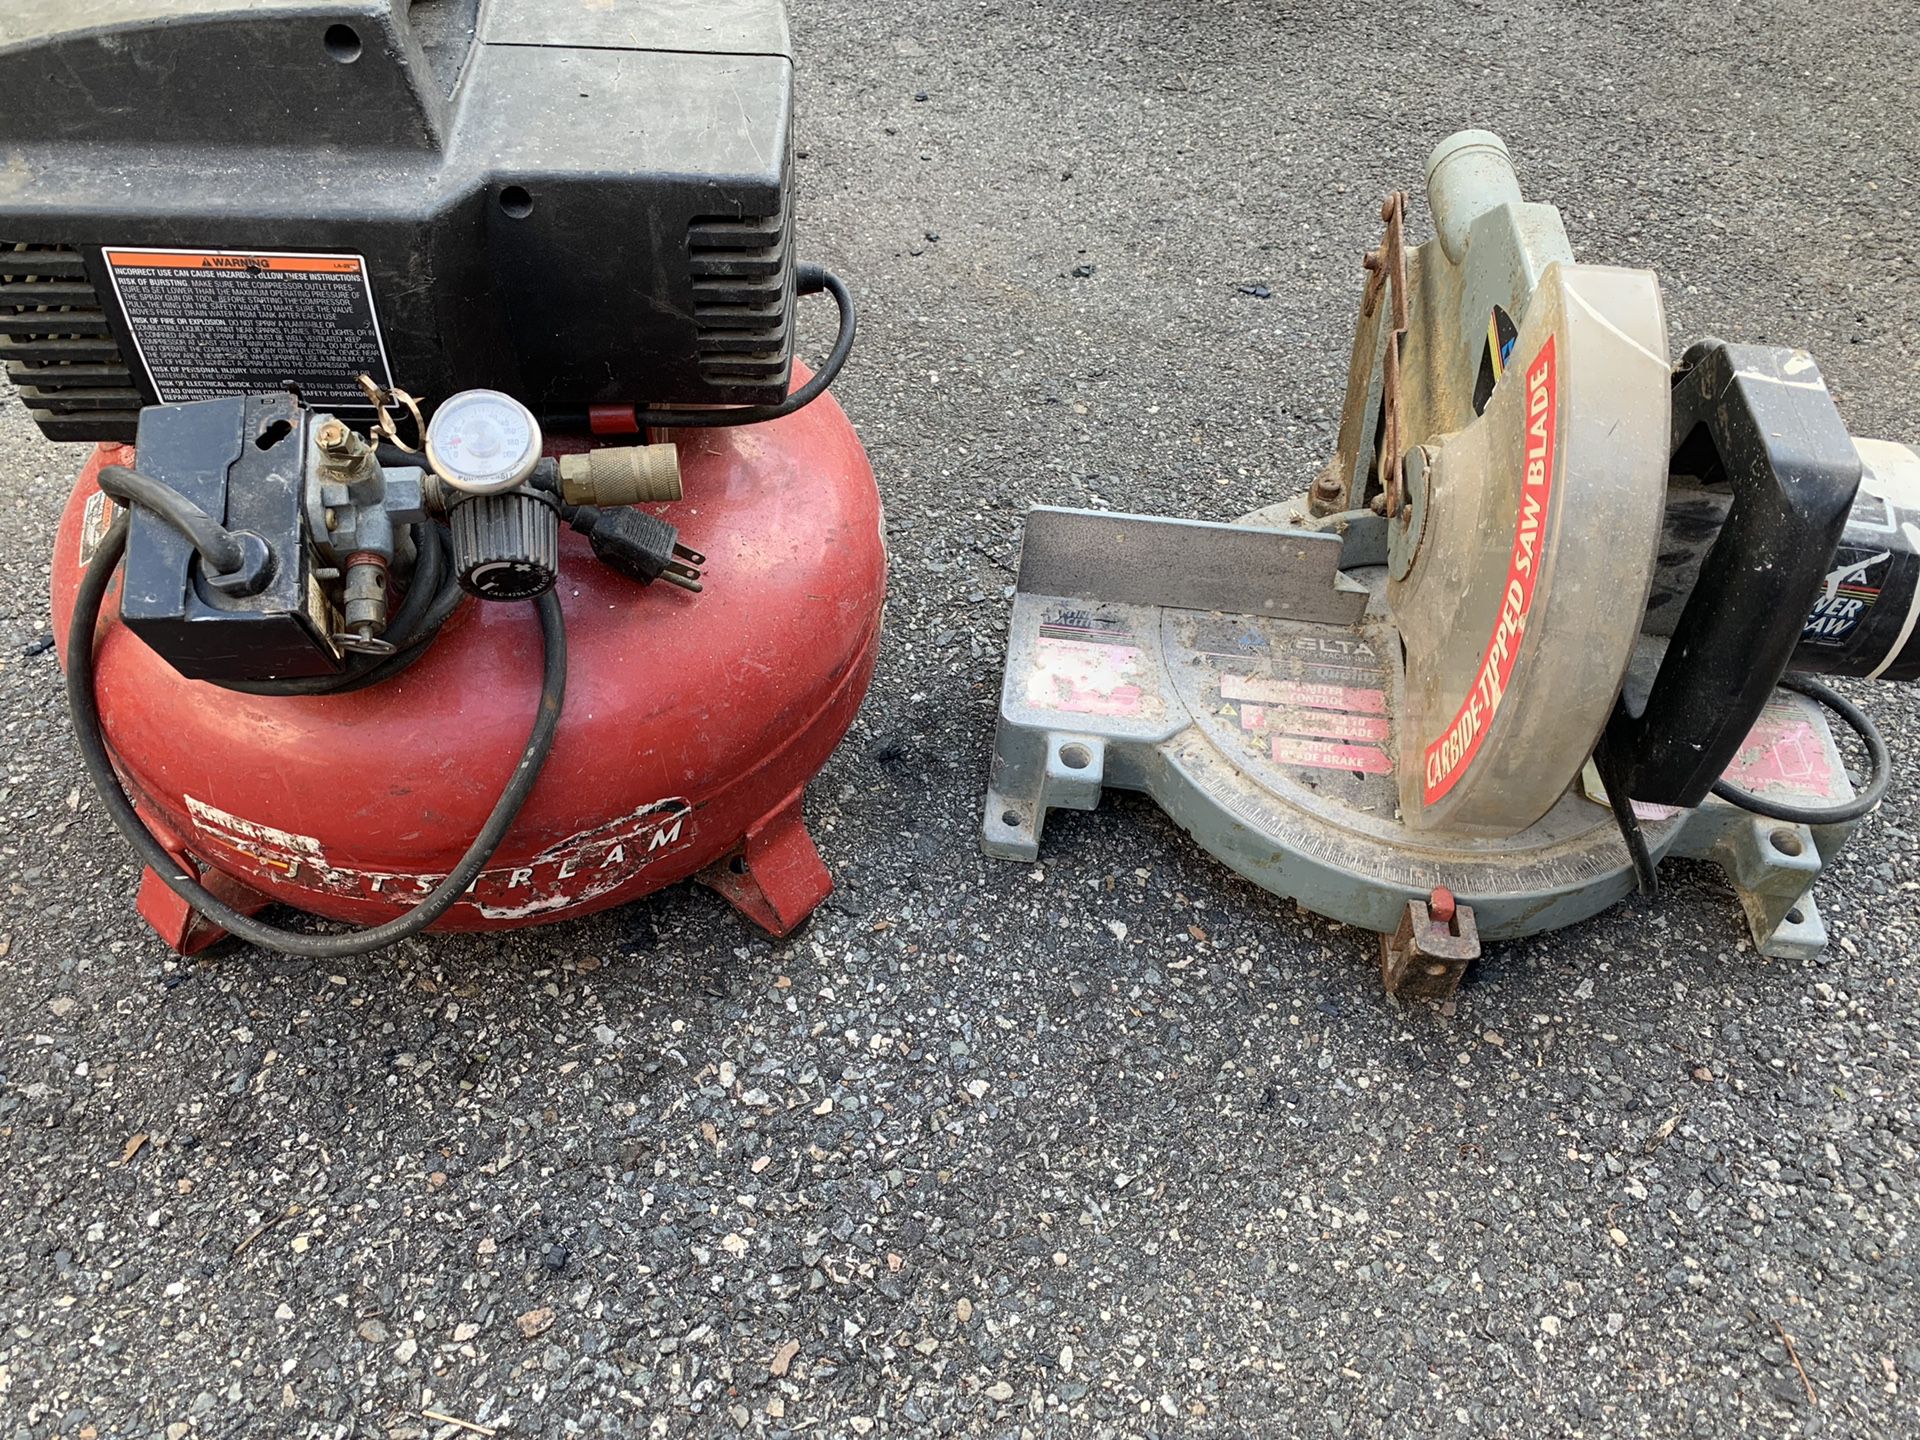 Air compressor and saw